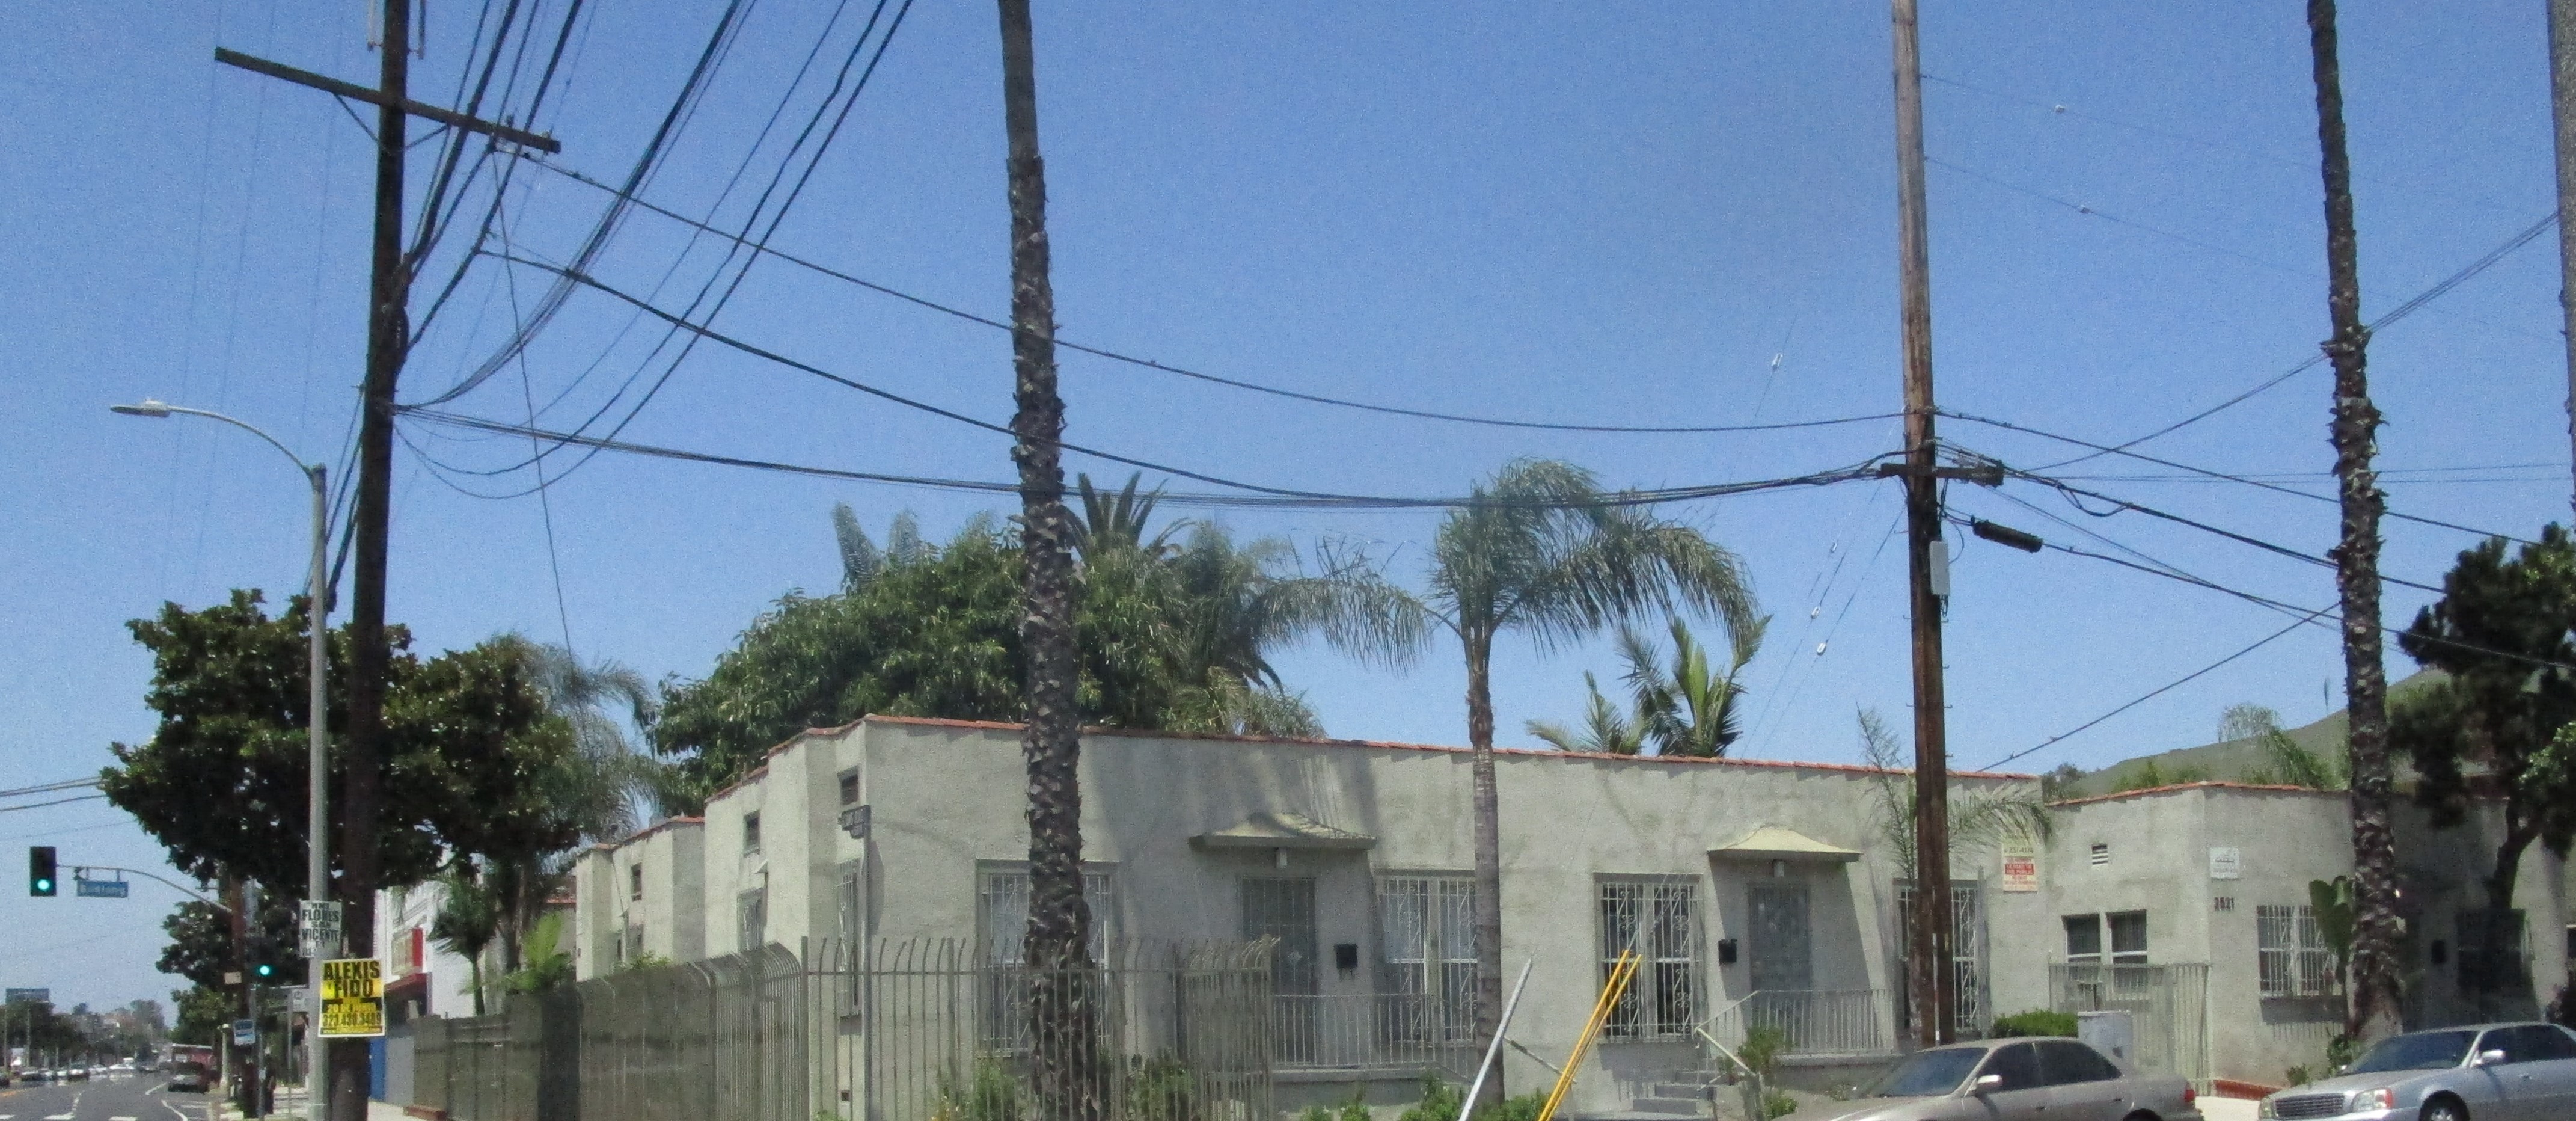 Image of property from corner street view. 
Buildings are light green with fences and a gate. 
Outside facing windows have bars. There are 2 electricity poles and 3 palm trees.